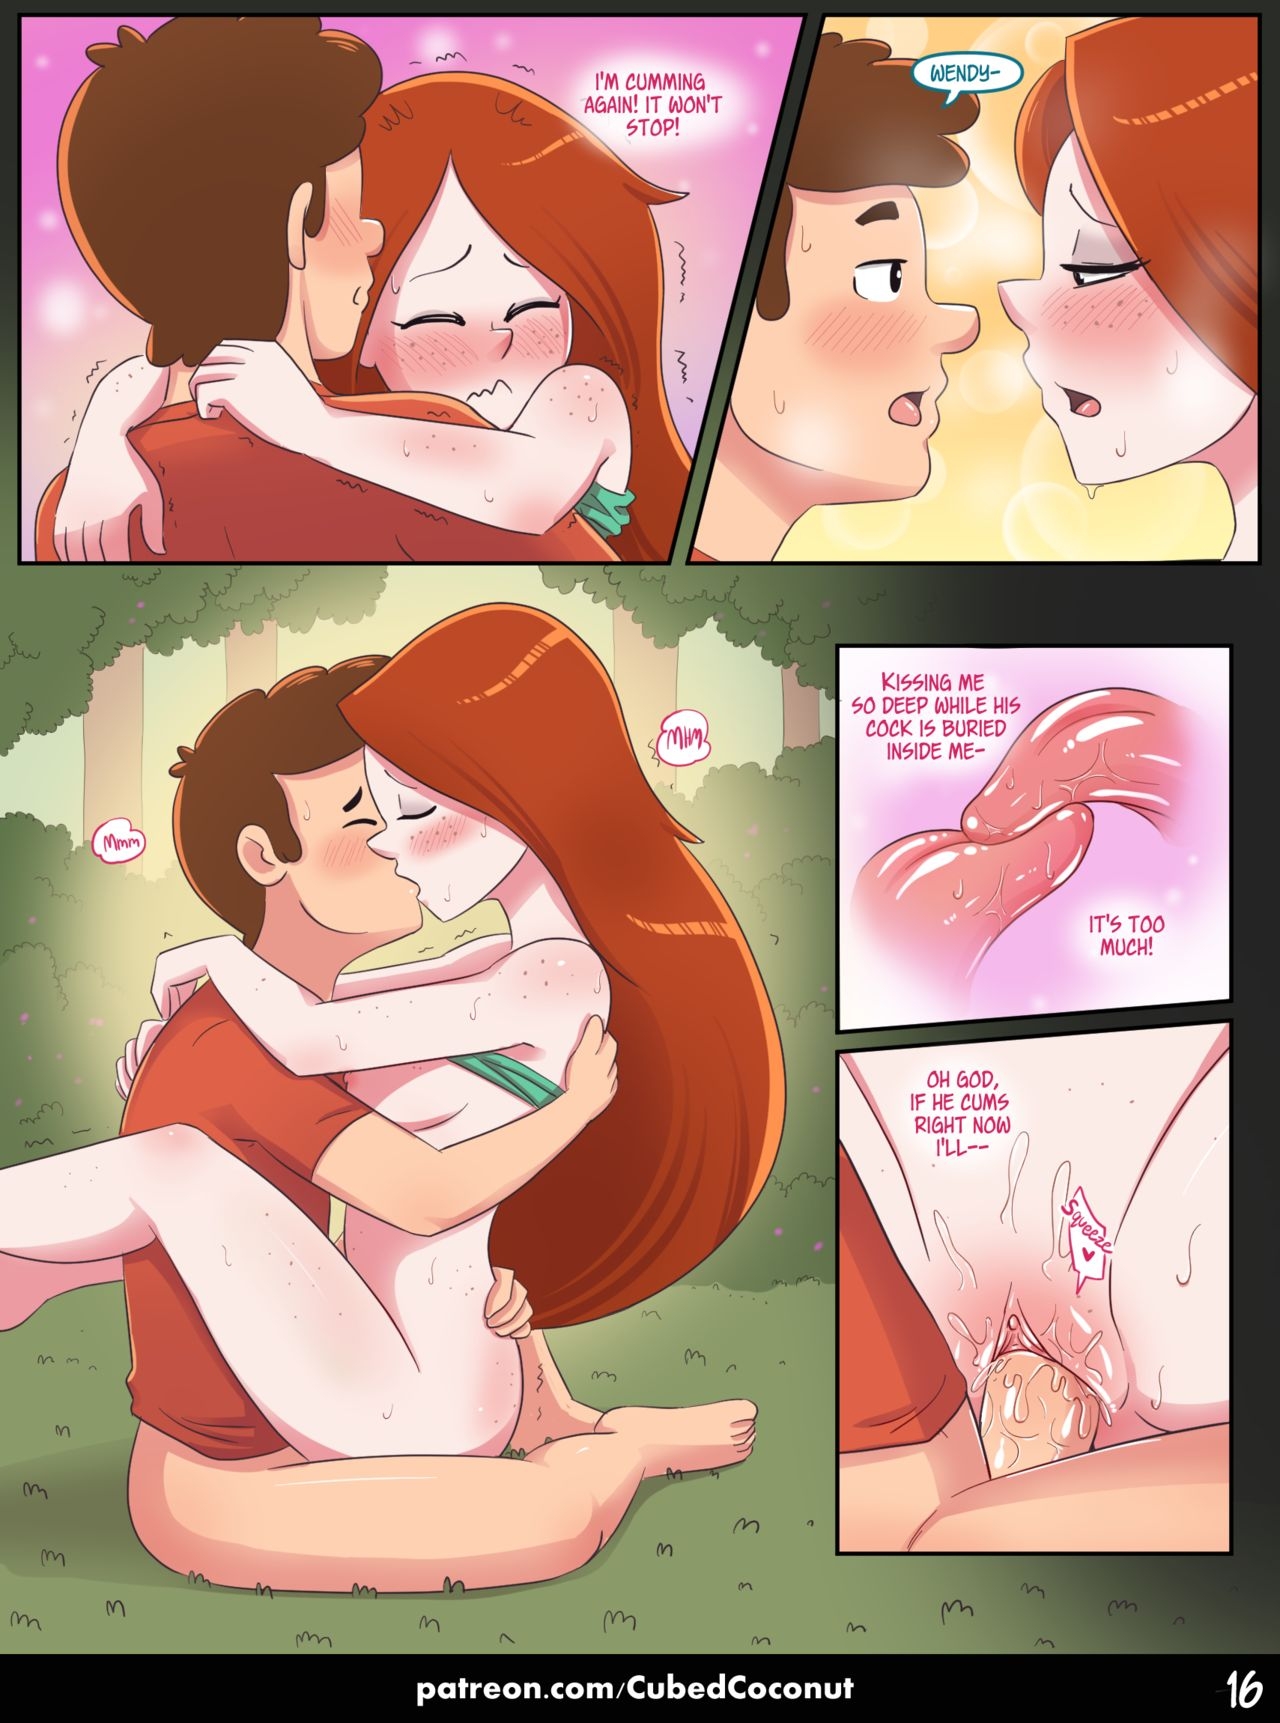 [Cubed Coconut] Wendy's Confession (Gravity Falls) 16